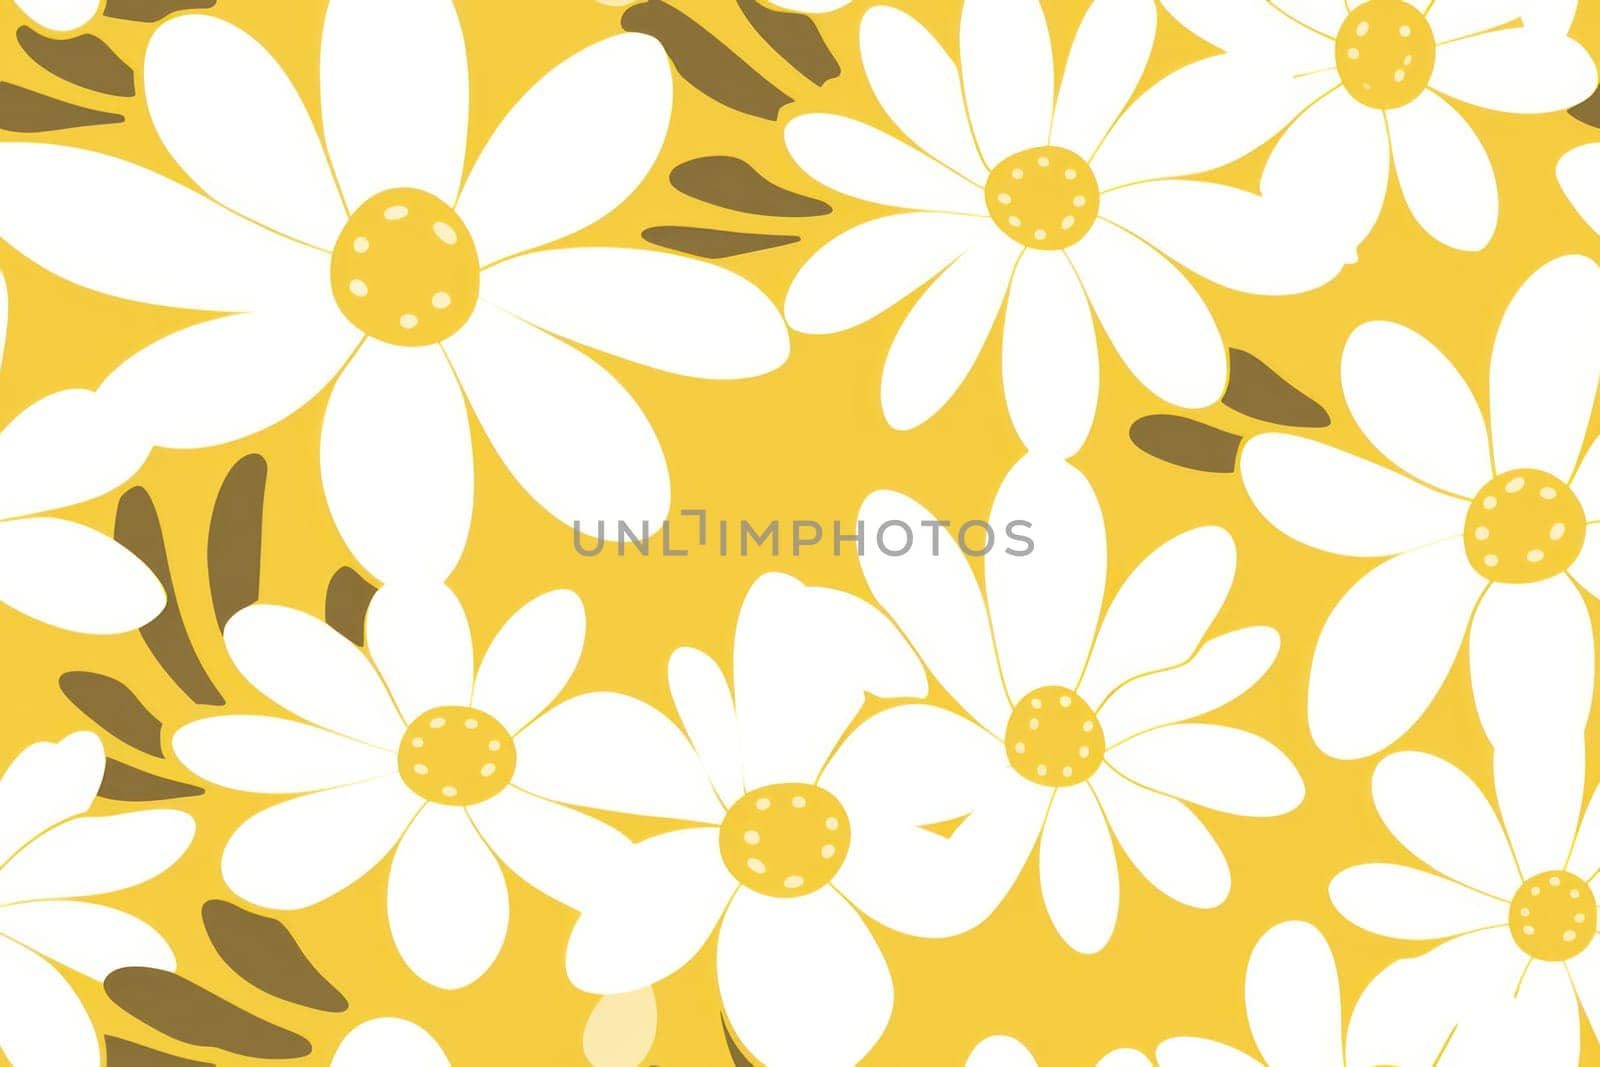 Floral Summer Bliss: A Seamless Pattern of Nature's Blossoming Daisies in White and Yellow, a Decorative Design Illustration on a Textured Wallpaper Background.